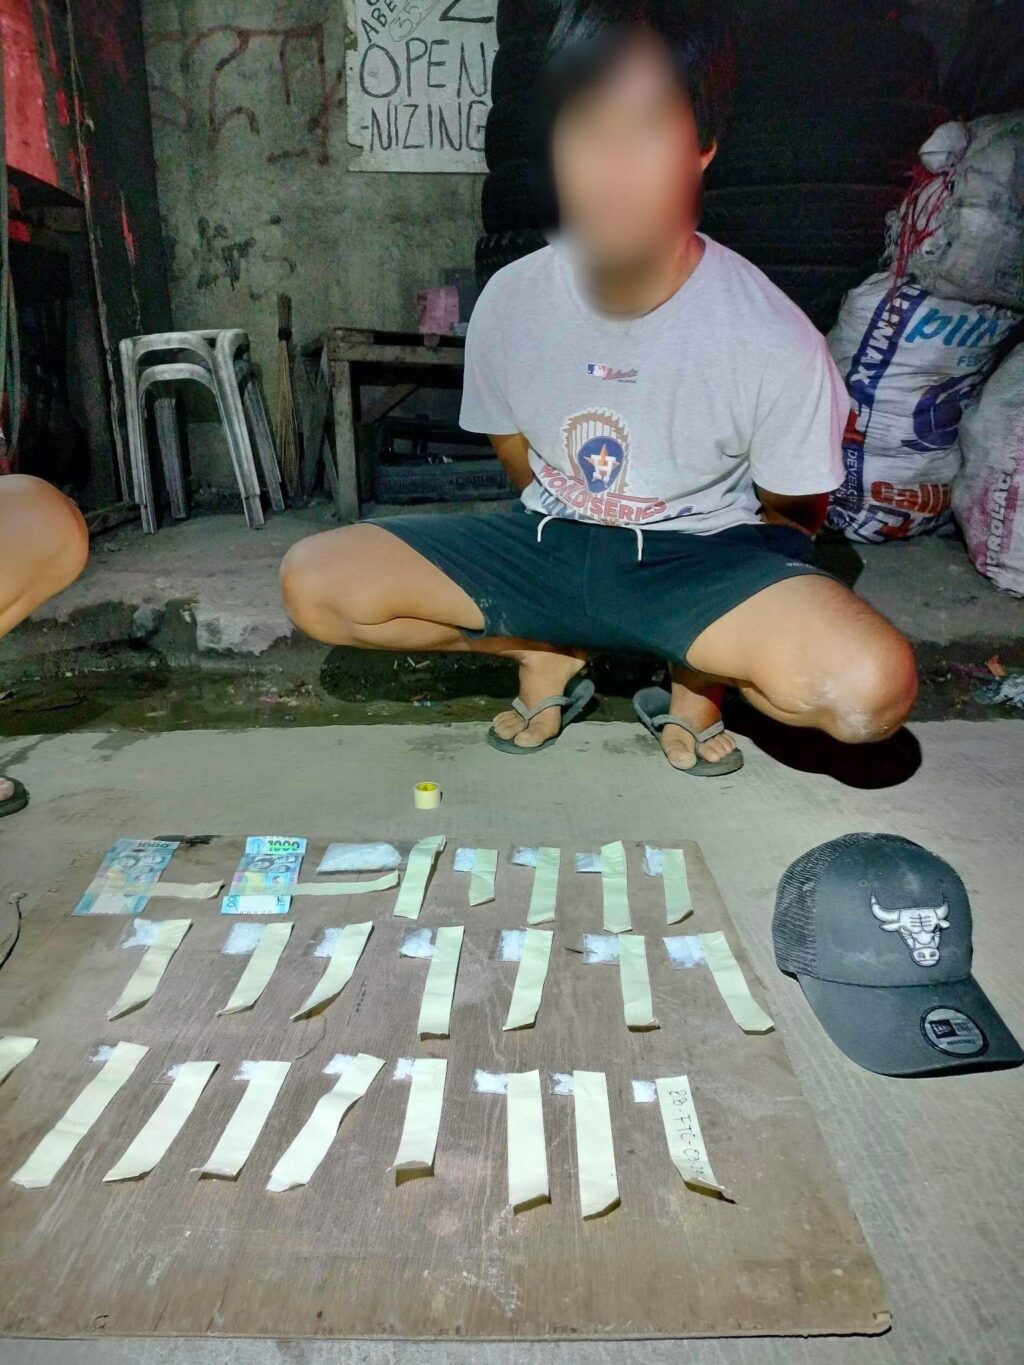 Mandaue drug bust: Case readied against man caught with P800,000 worth of ‘shabu’. In Photo is Floyd Jemlan Capadiso of Consolacion town, who was caught with P800,000 worth of suspected shabu during a buy-bust operation in Sitio Pilit, Barangay Cabancalan, Mandaue City on March 29. | Contributed photo via Paul Lauro